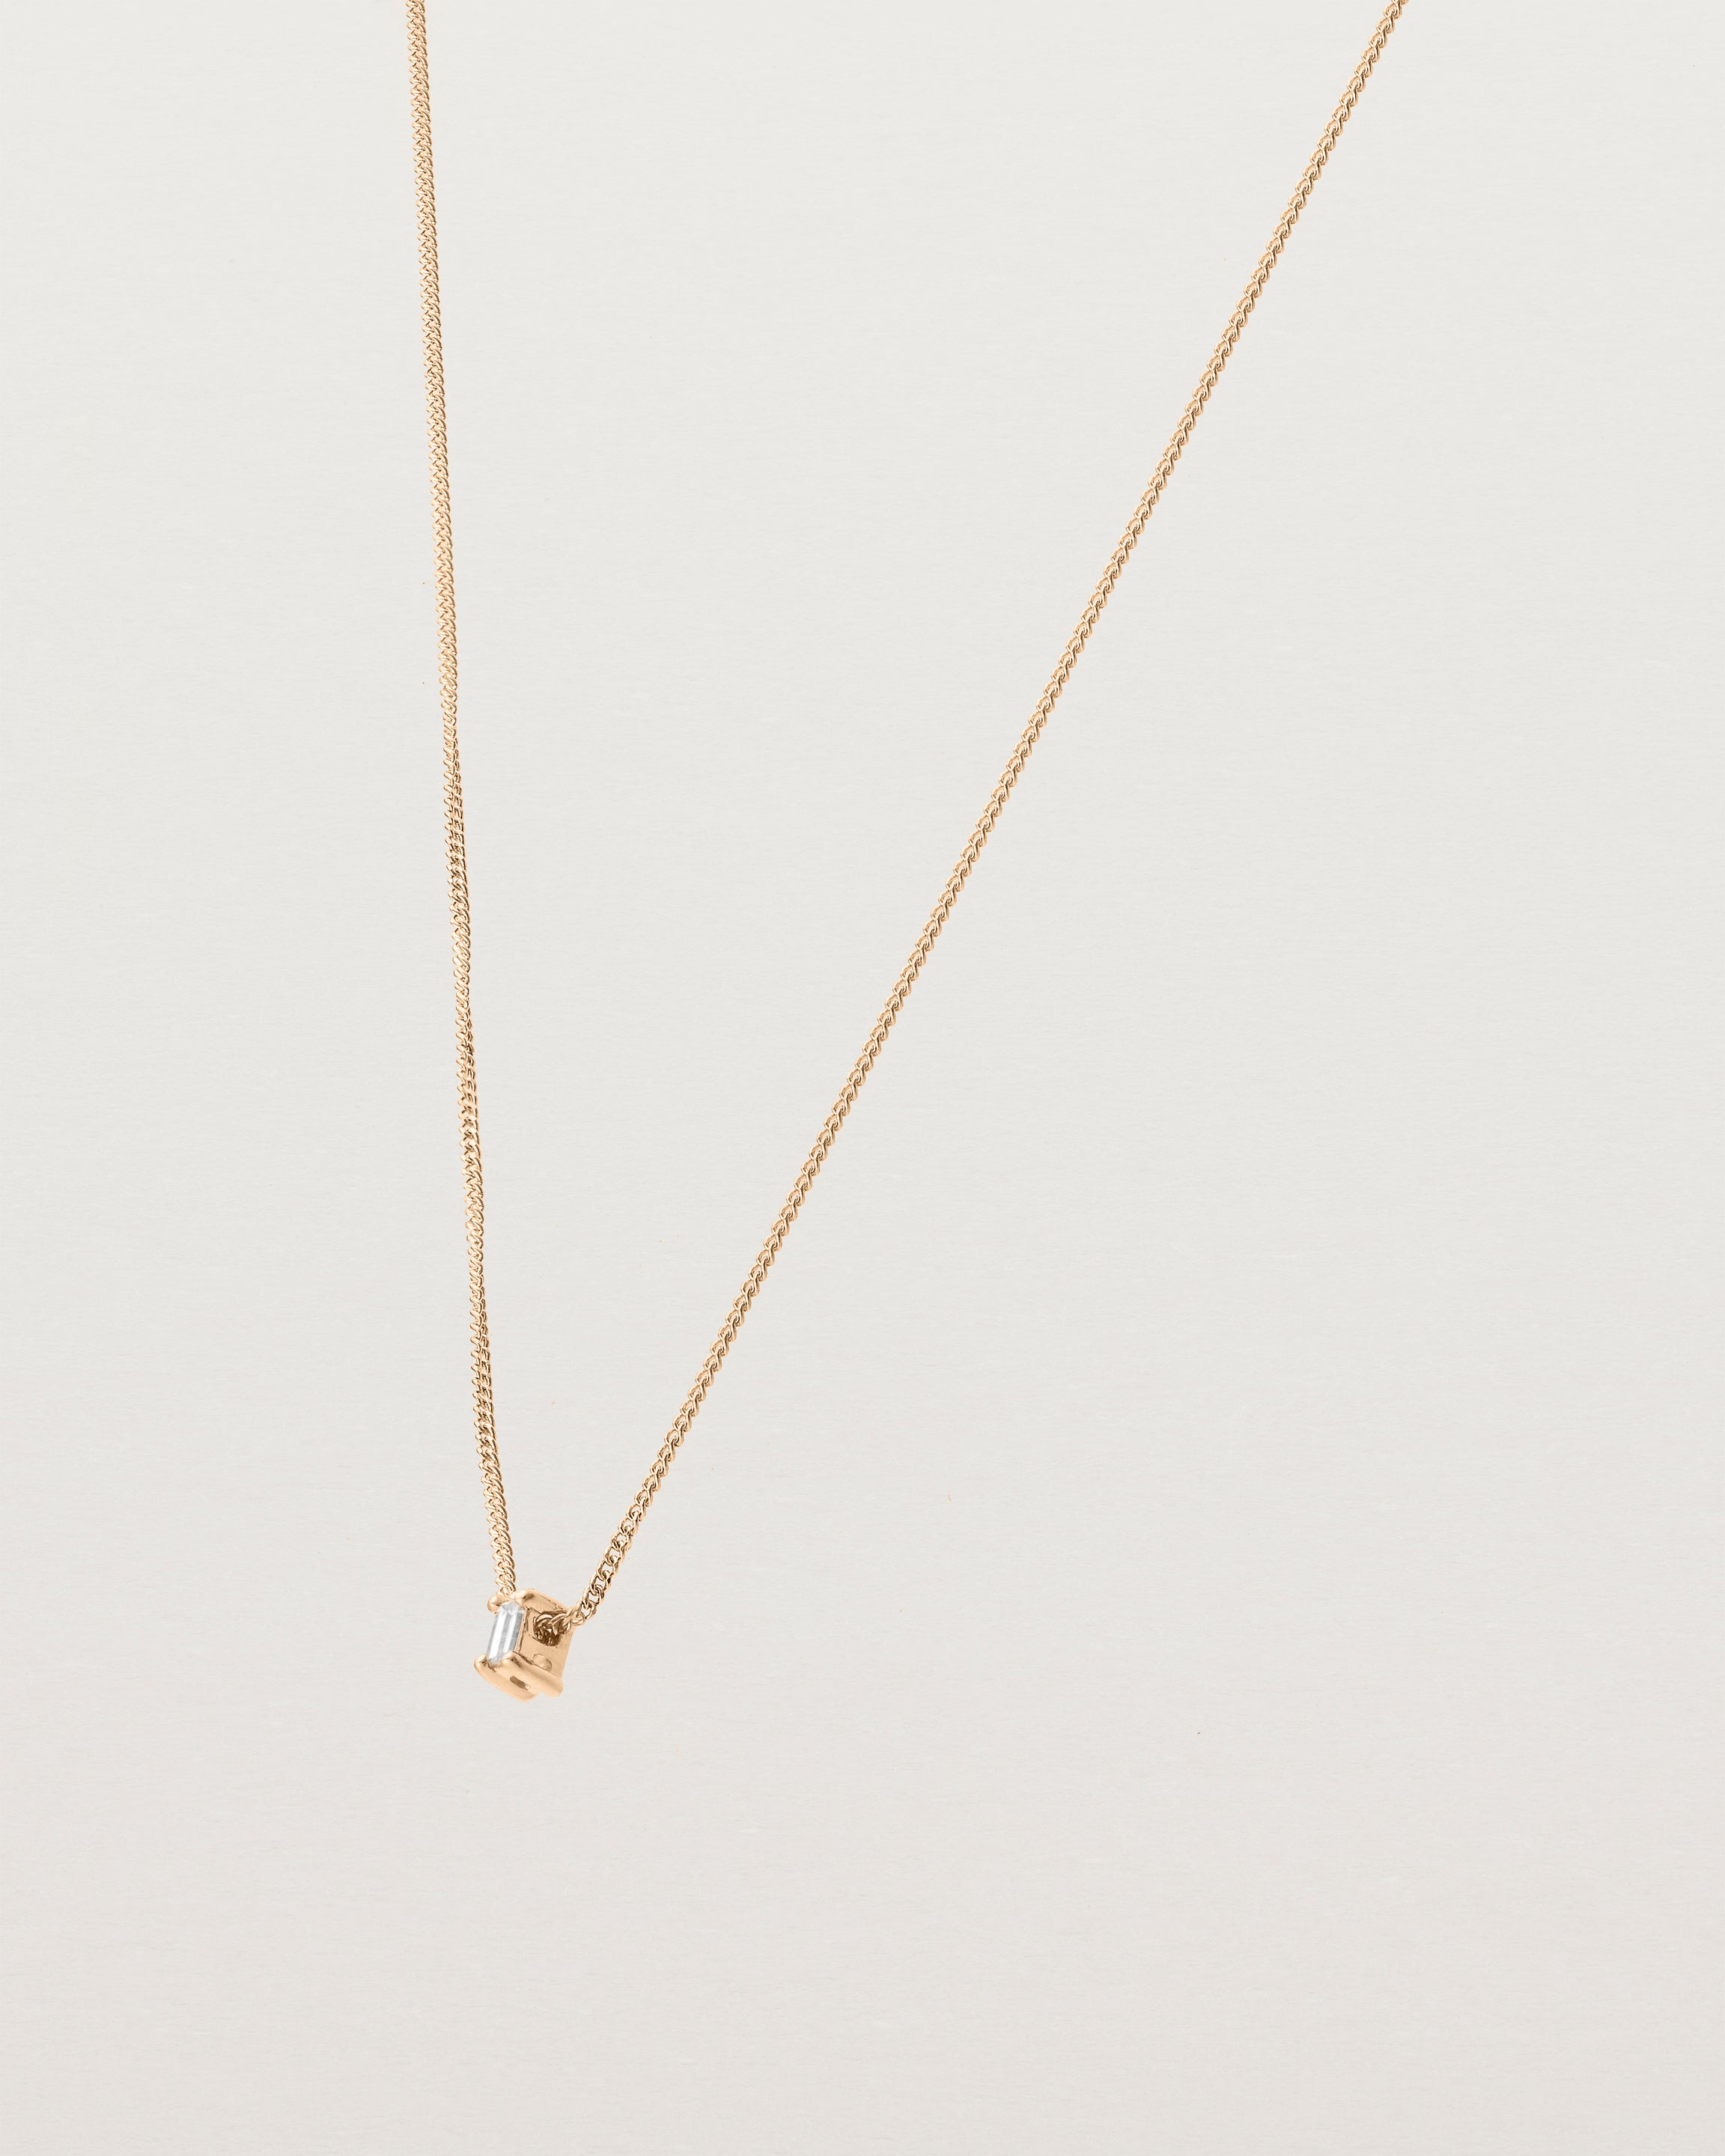 Angled view of the Sena Slider Necklace with White Diamond in rose gold.